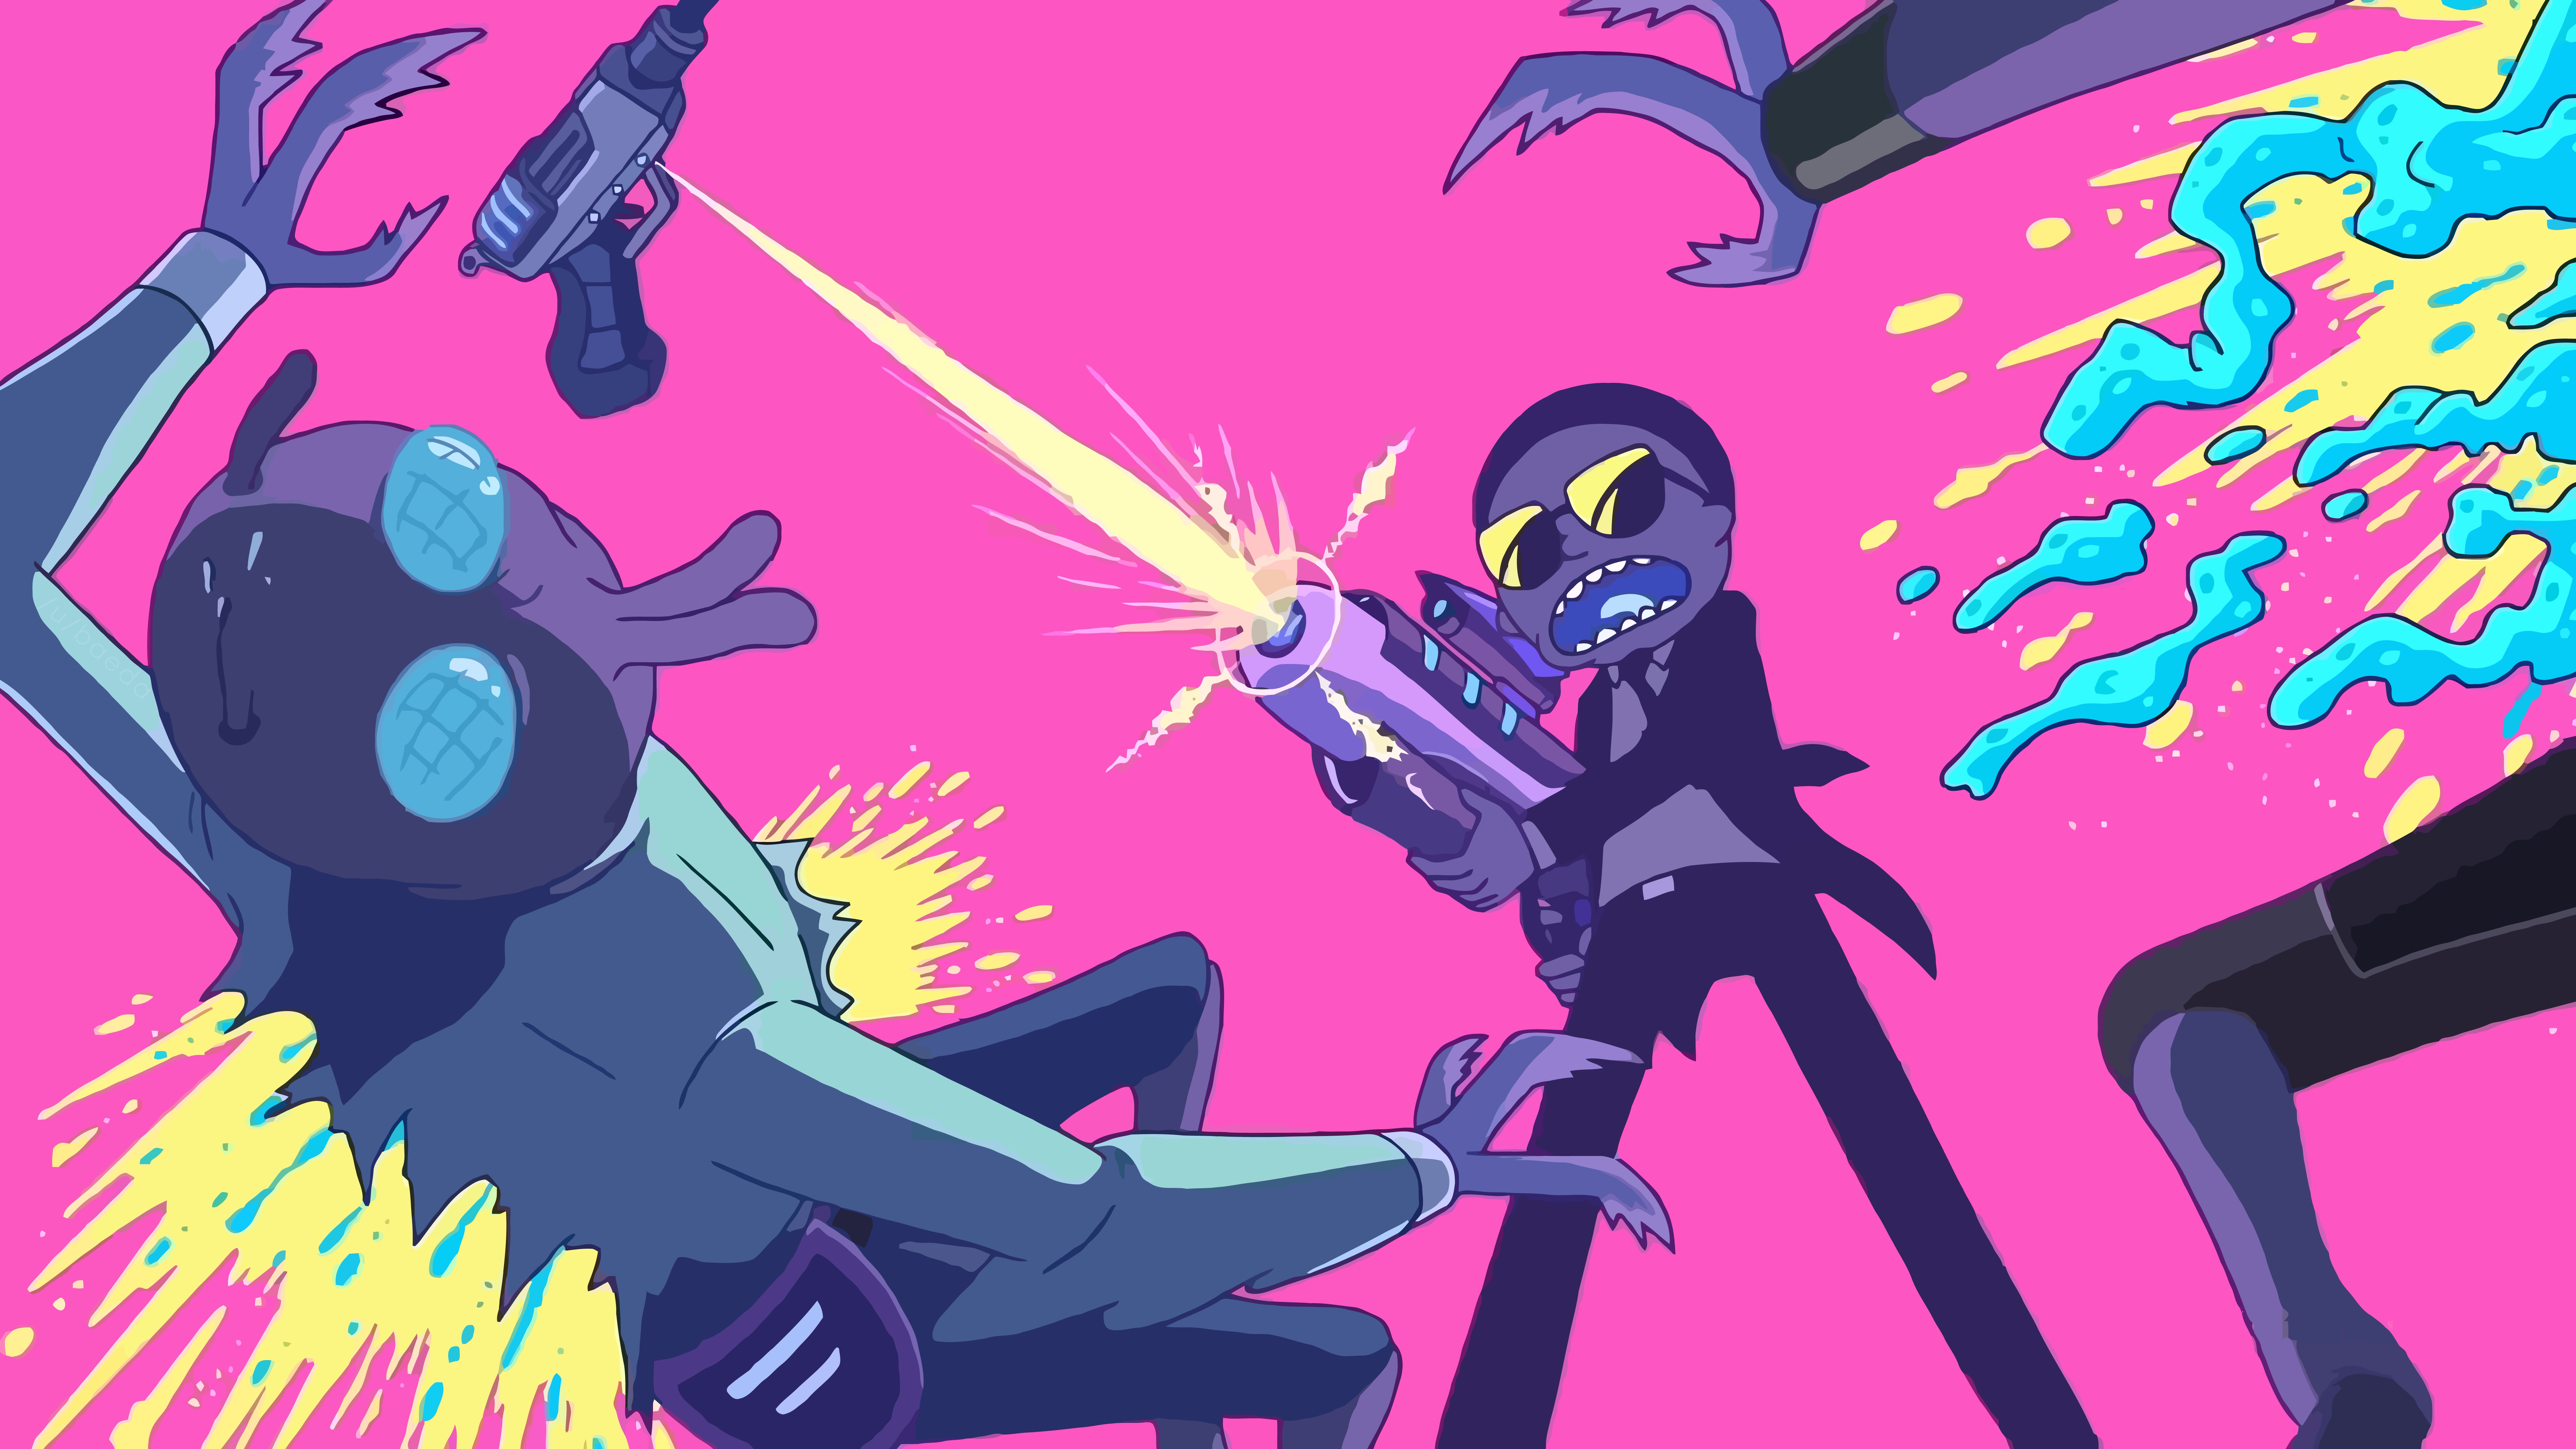 Rick and Morty Fighting WIth Aliens Wallpaper, HD TV Series 4K